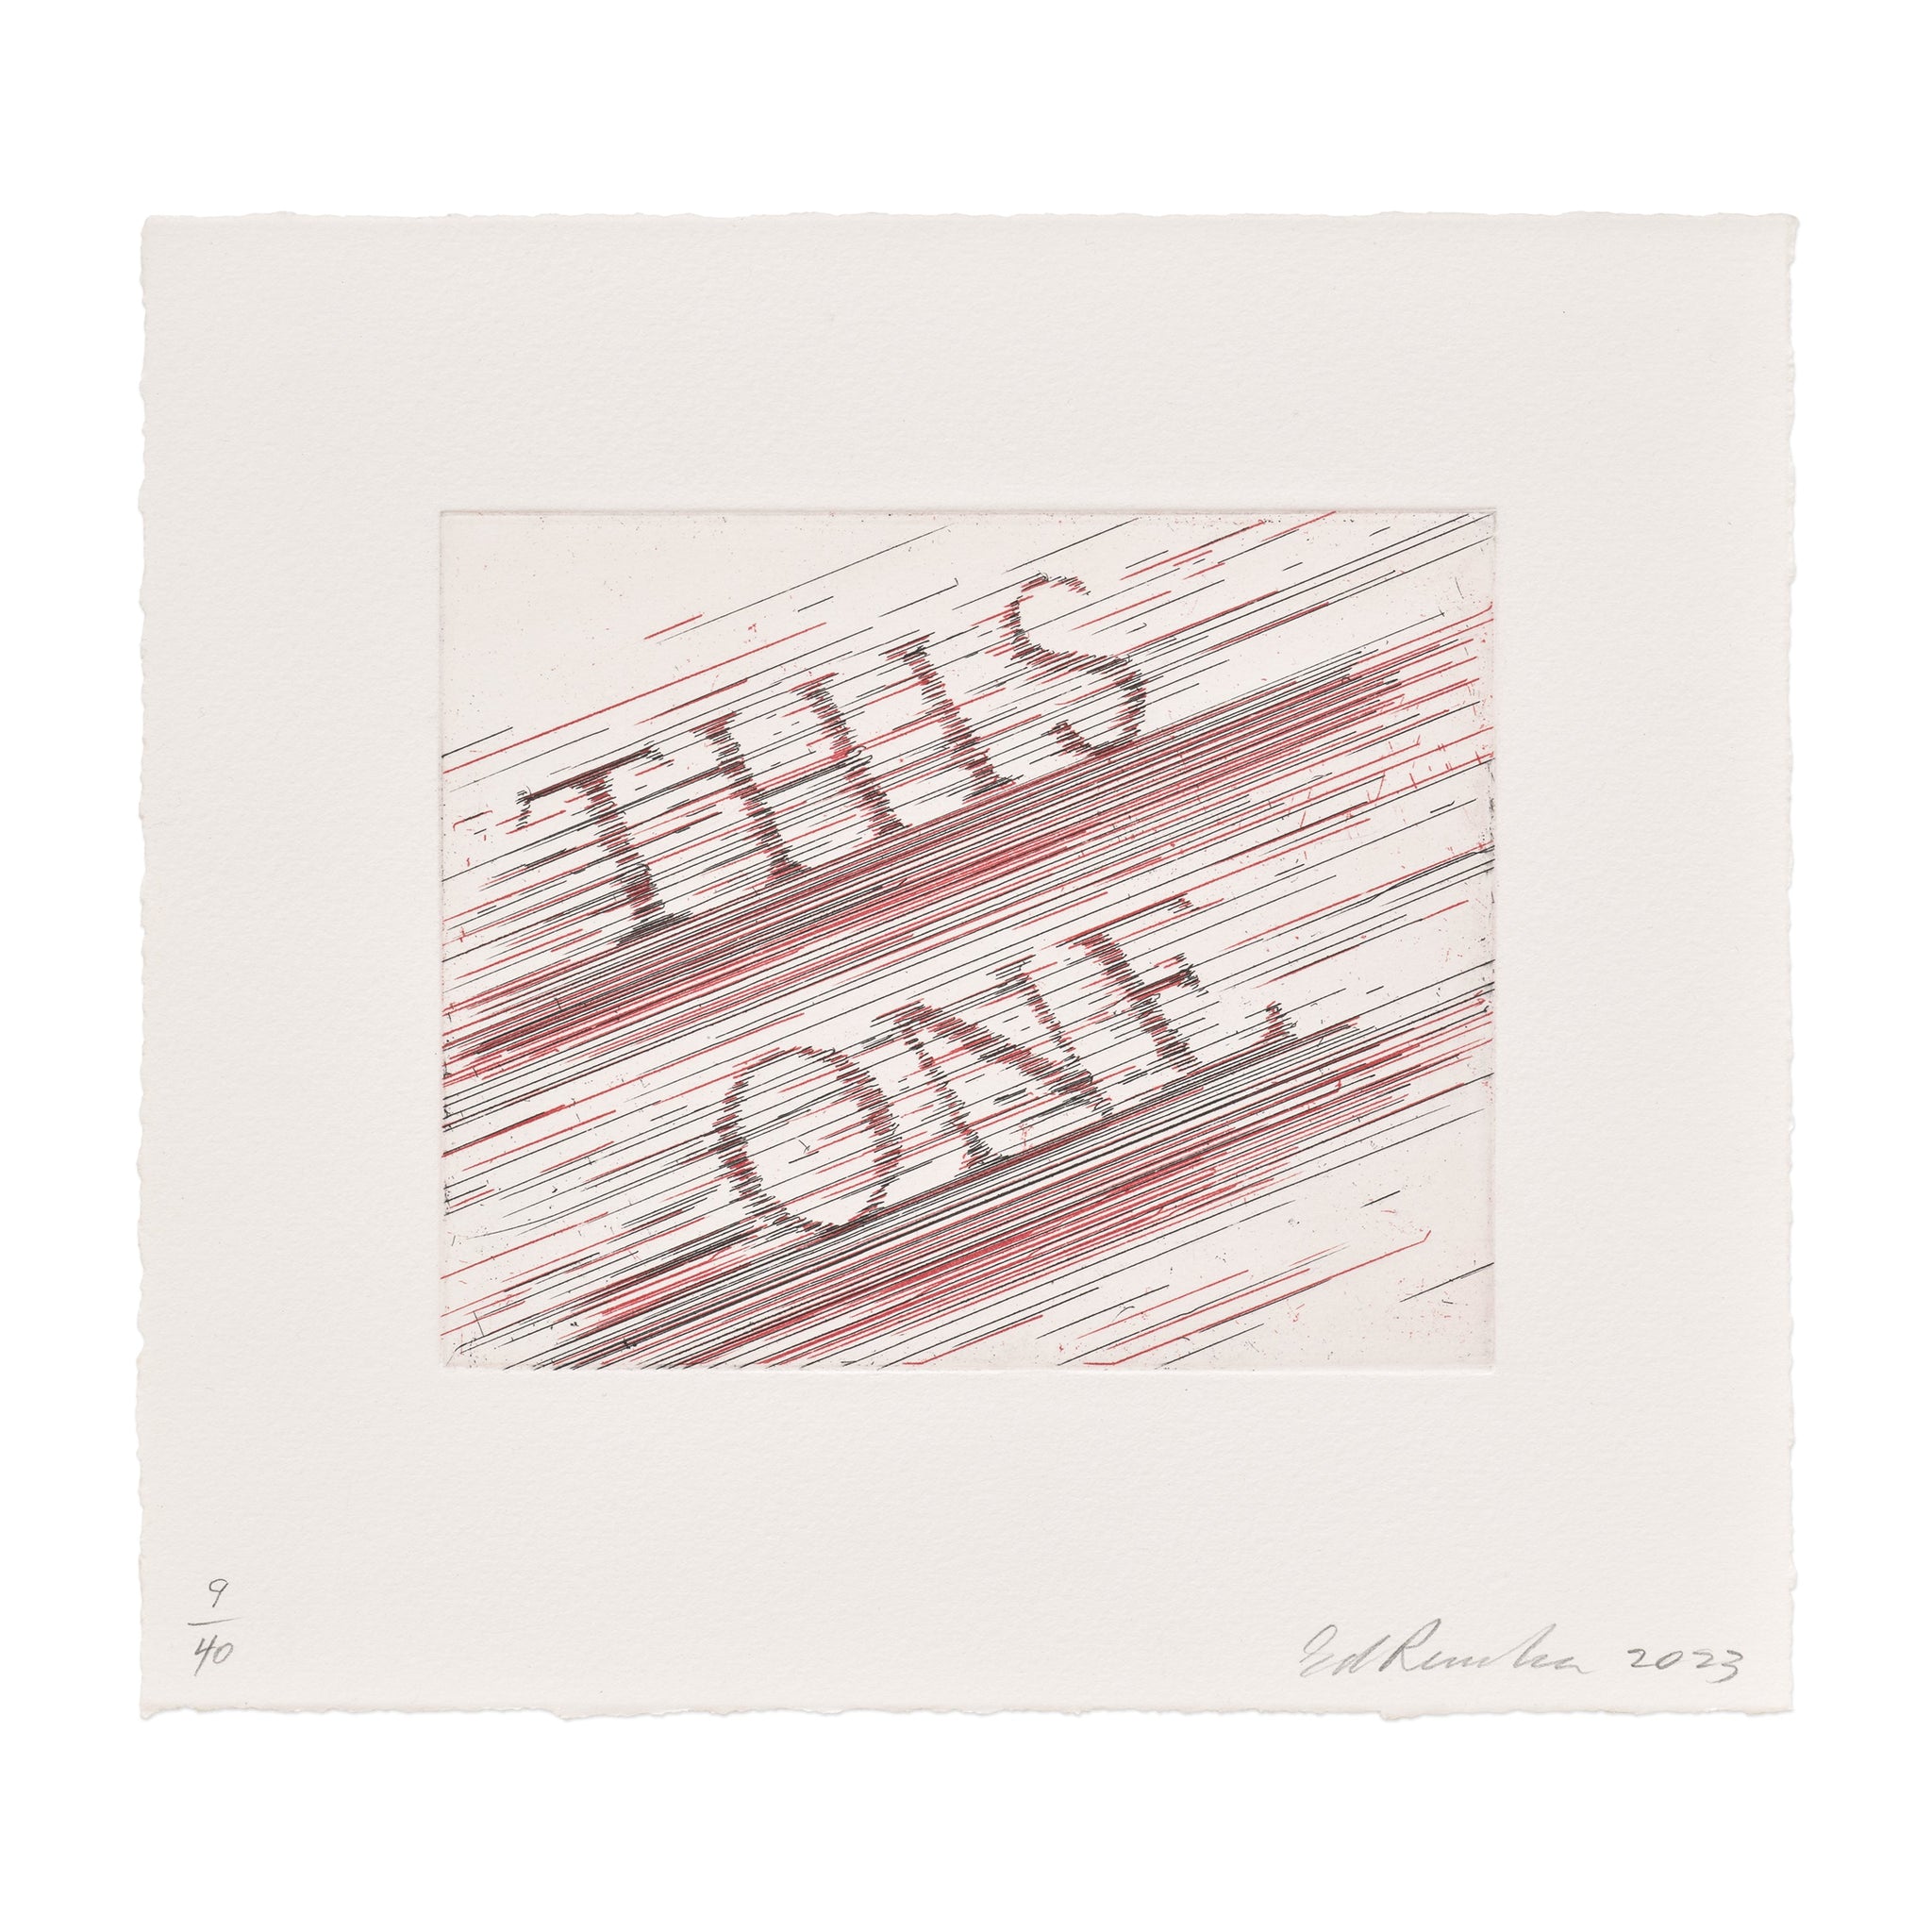 Ed Ruscha: This One etching